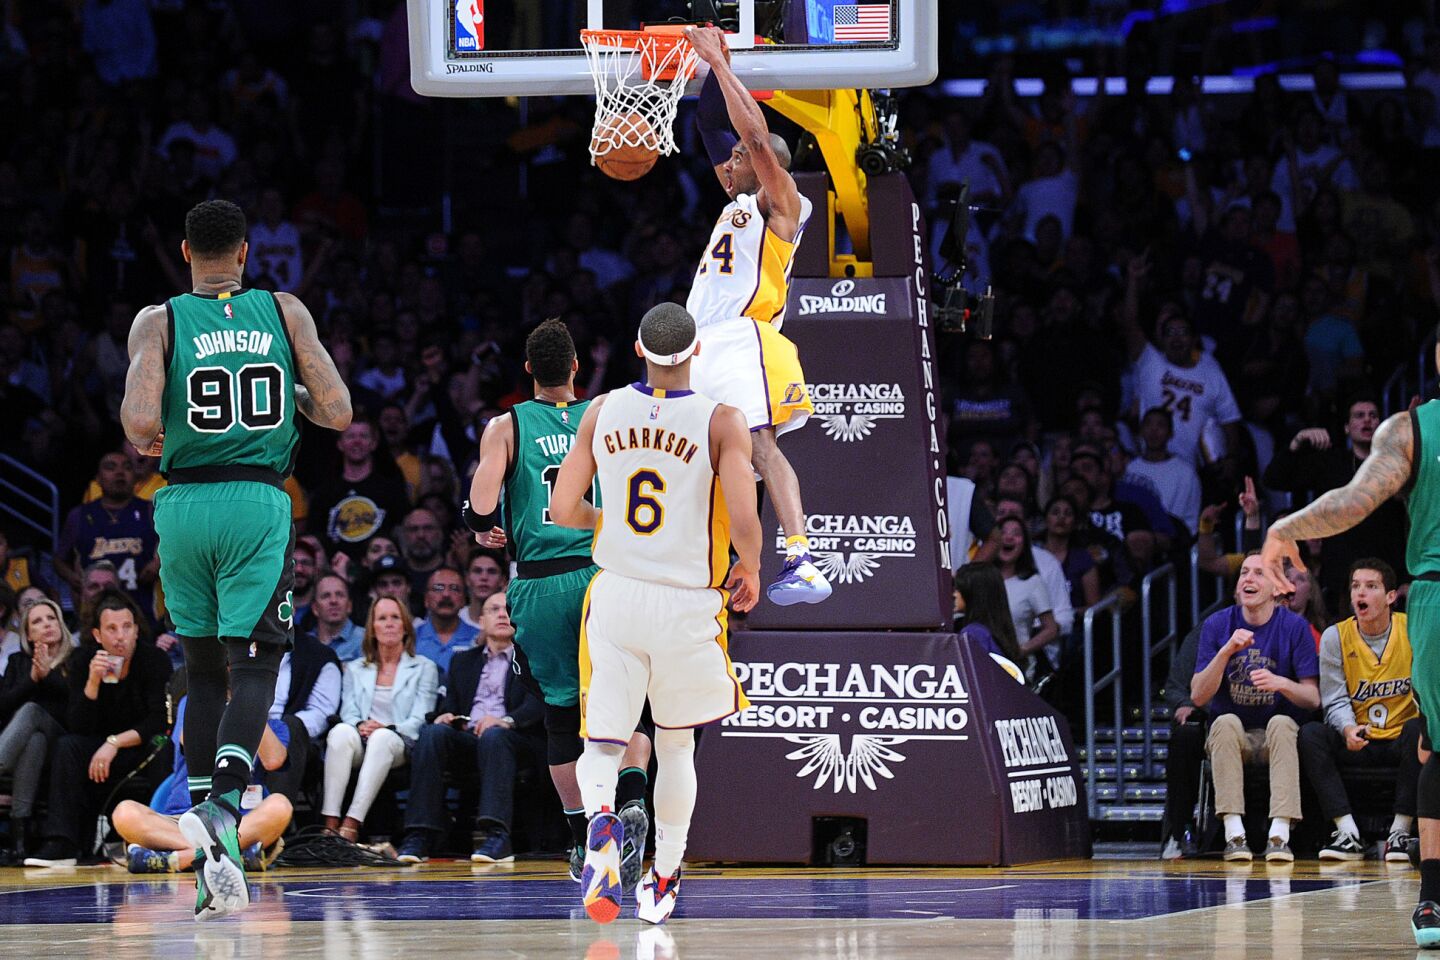 Kobe Bryant's 34 points not enough against Lakers old rival, the Boston Celtics